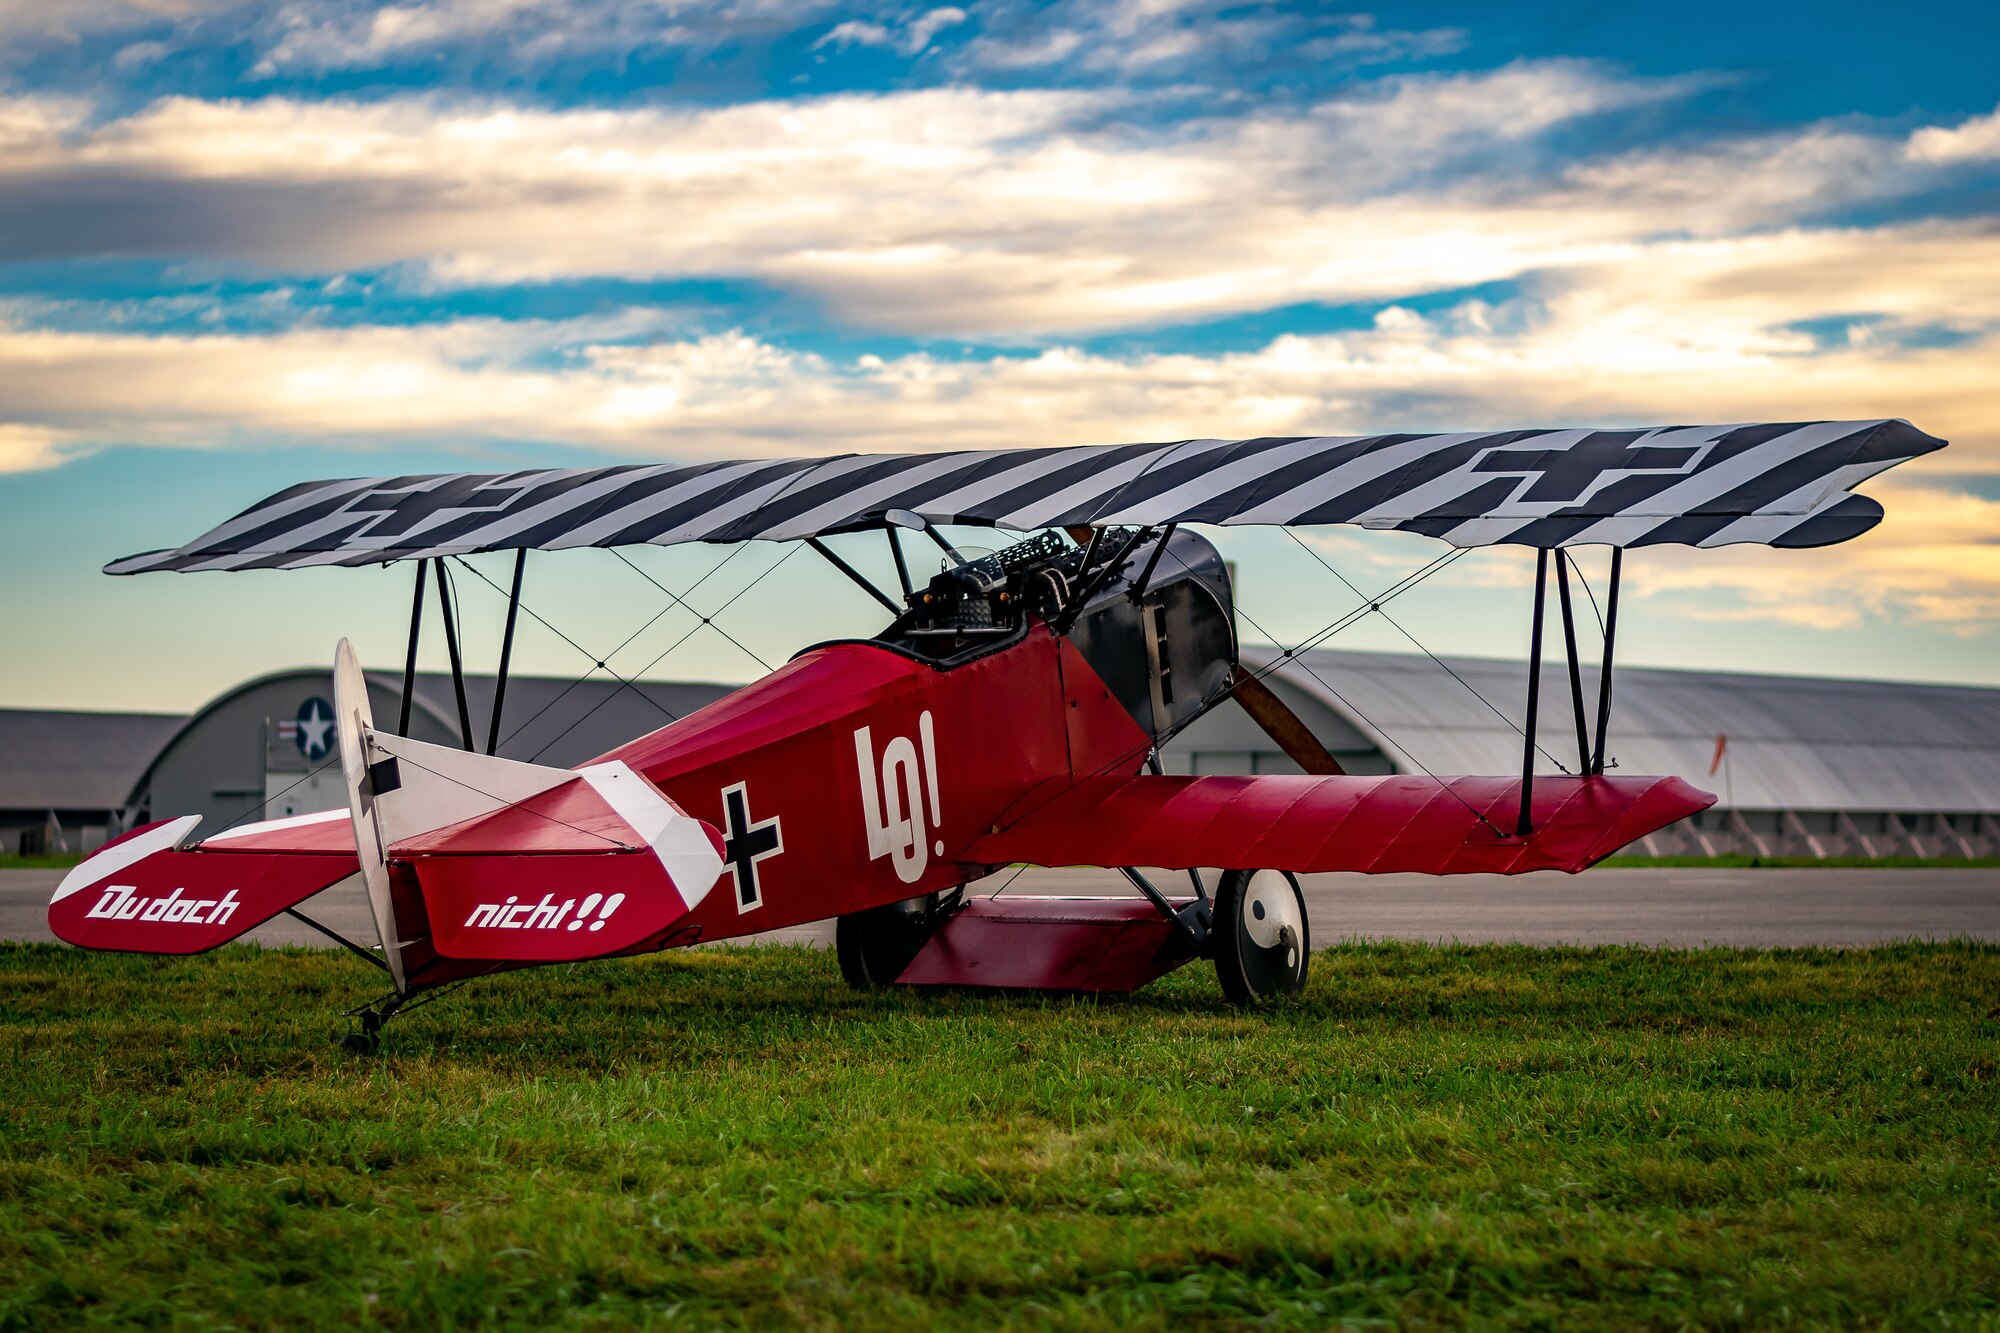 DAYTON, Ohio -- World War I replica aircraft took to the skies during during the eleventh WWI Dawn Patrol Rendezvous at the National Museum of the U.S. Air Force on Sept. 22-23, 2018. This aircraft is a Fokker DVII replica owned and flown by Mark Hymer from Owasso Oklahoma. (Courtesy photo by Courtney Caillouet)